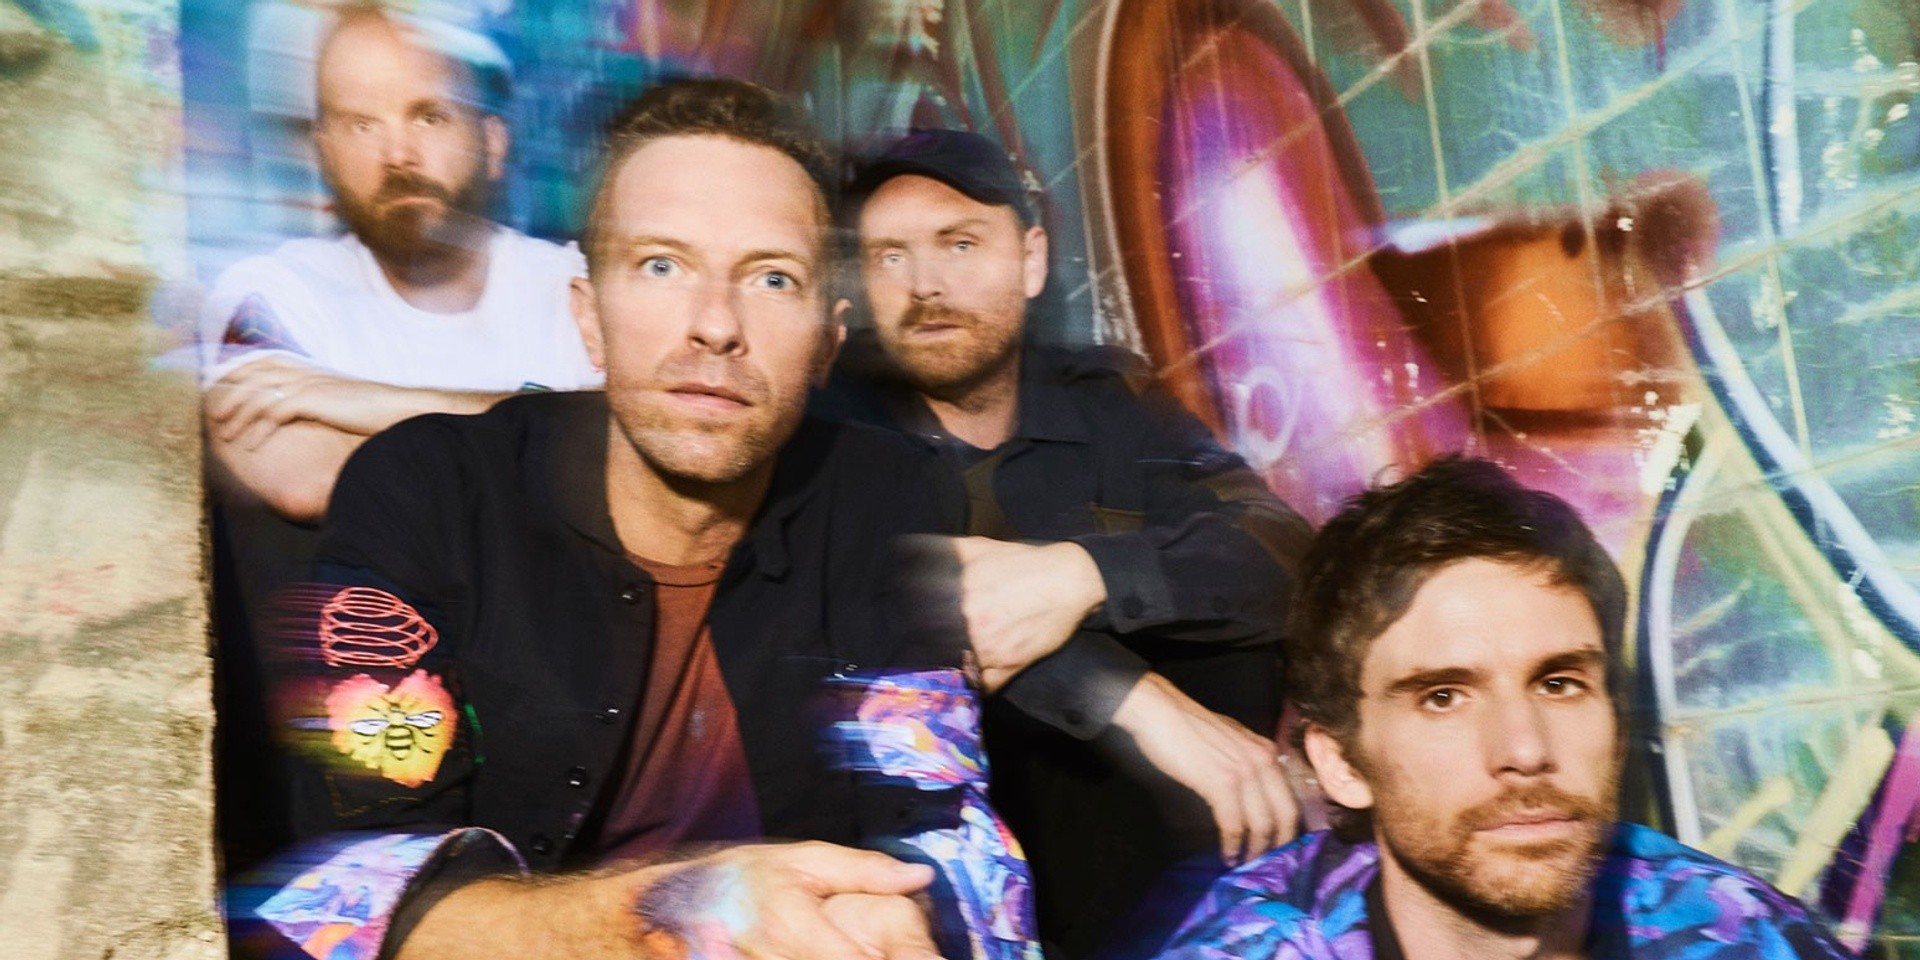 Coldplay make a cosmic connection with fans through "Music of the Spheres"— album review